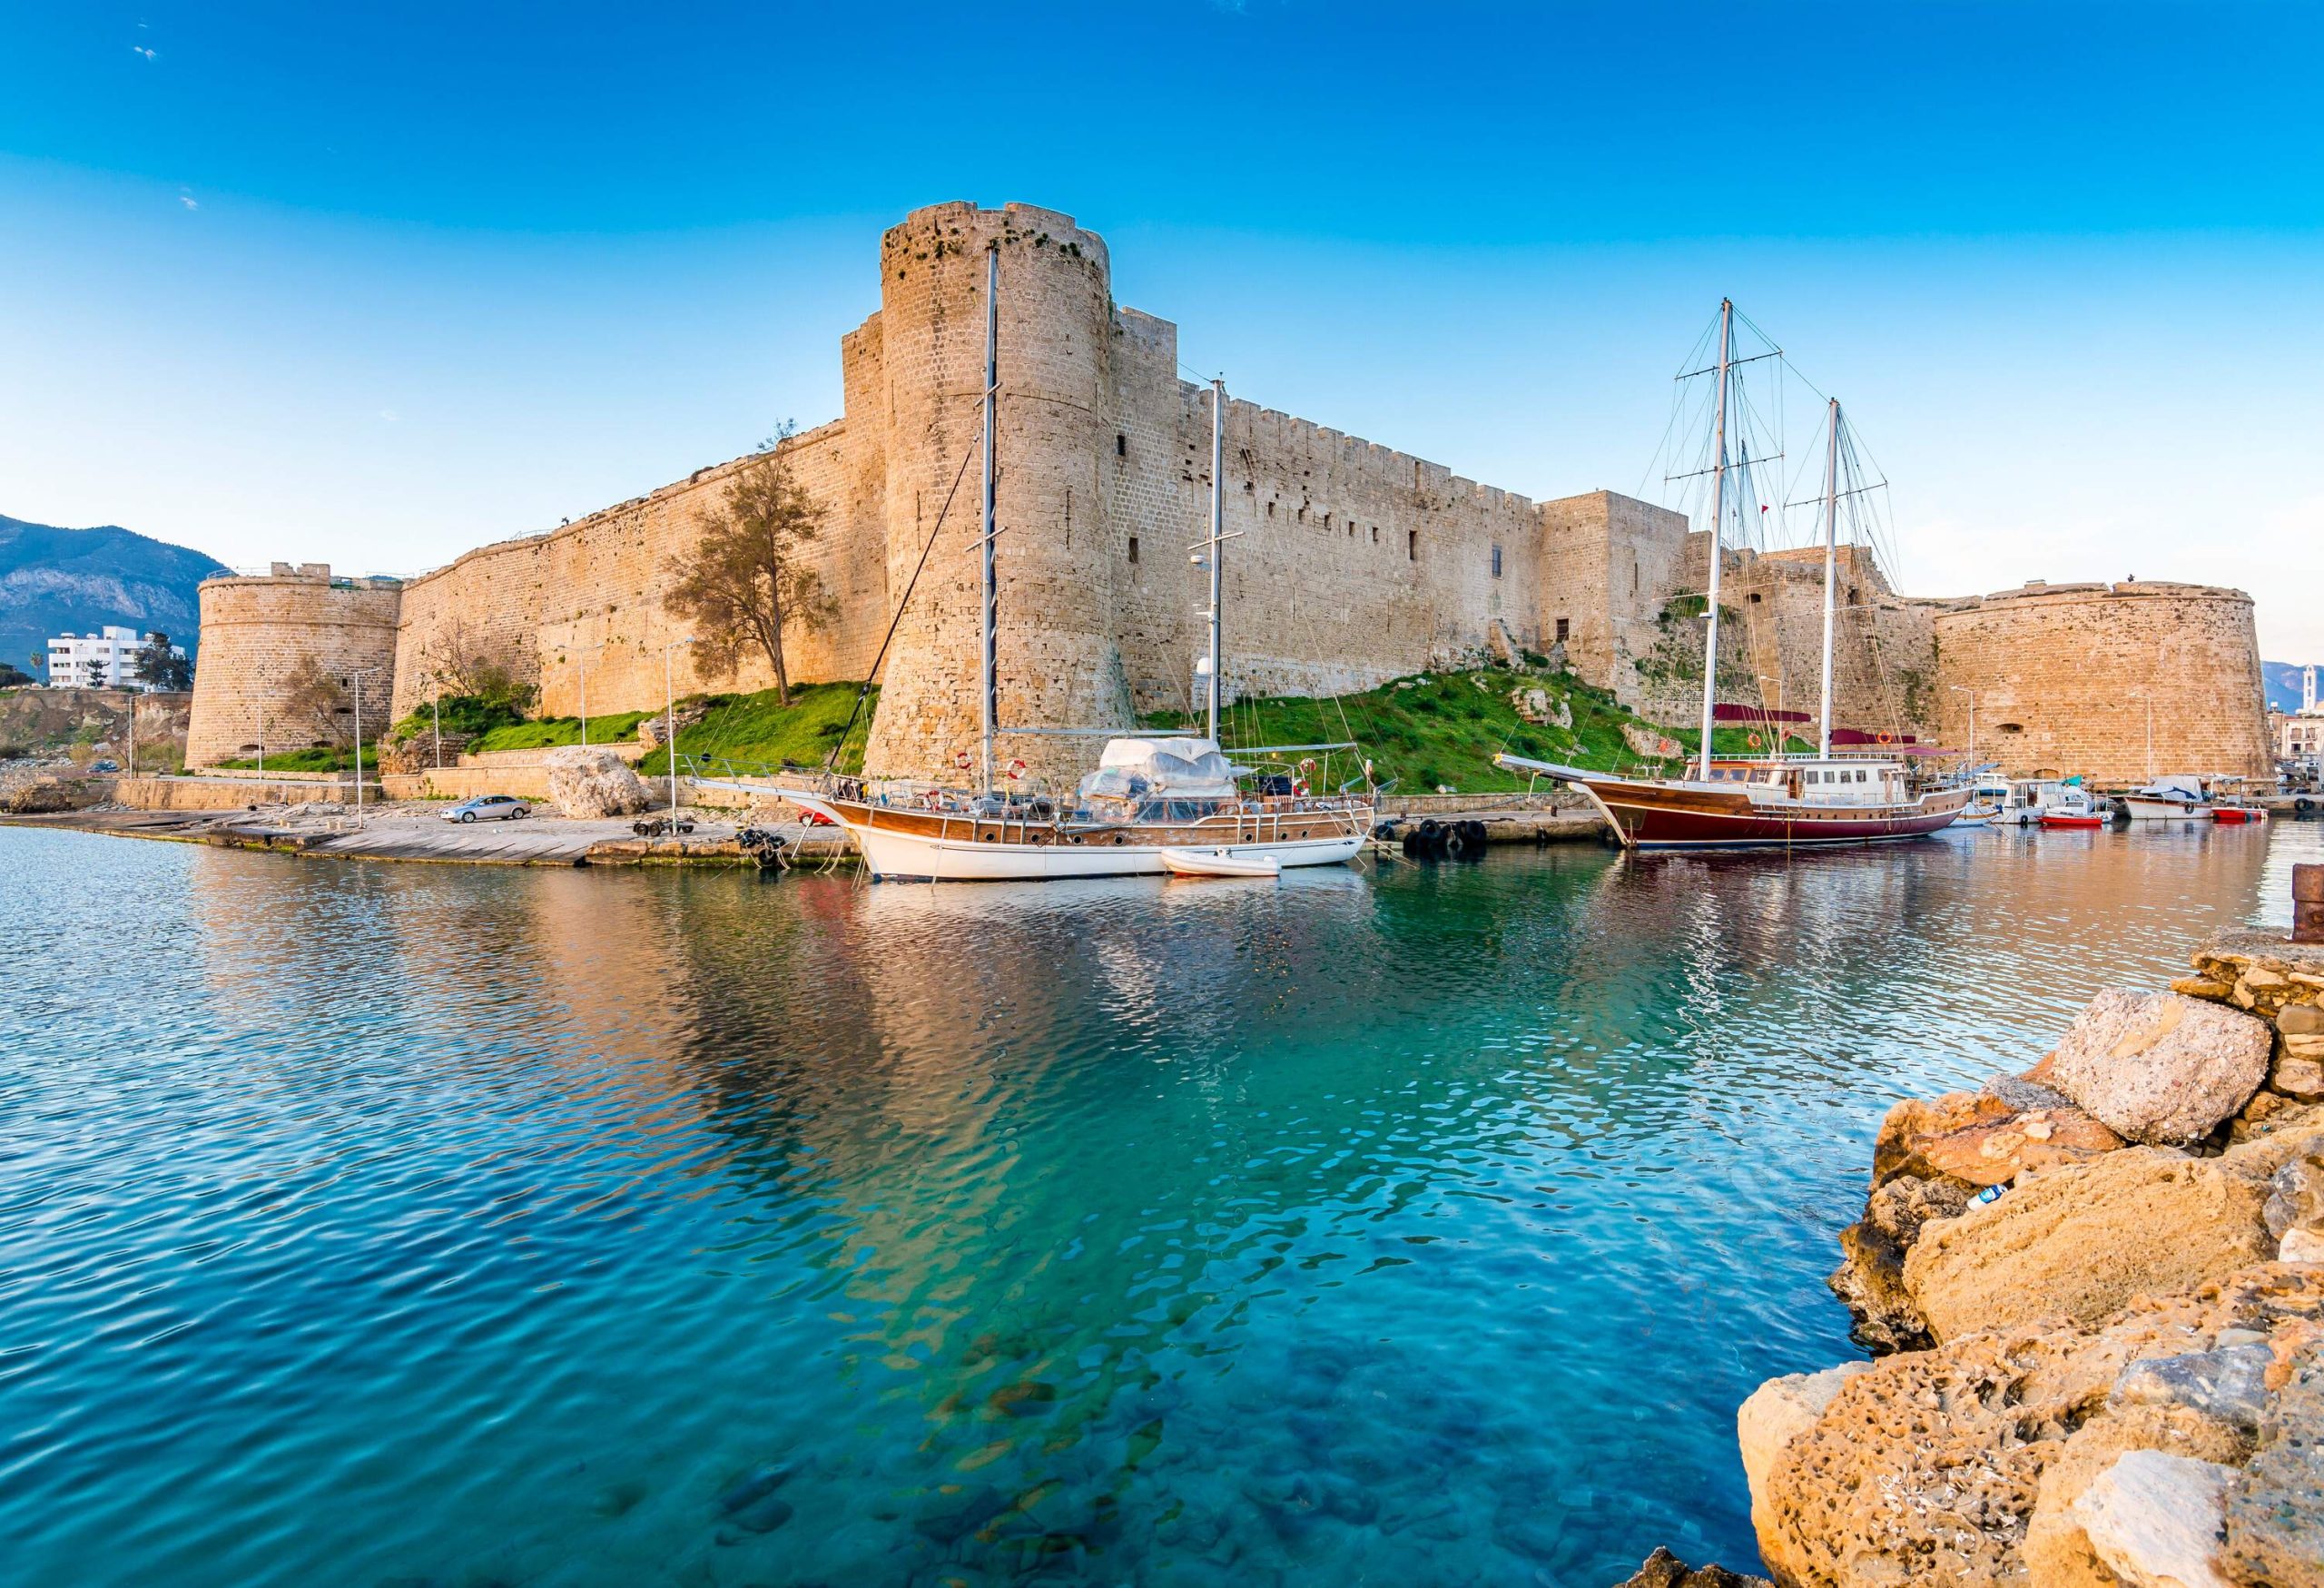 An old fortress with bastions extending from each corner towards the sea, which is teeming with moored boats.